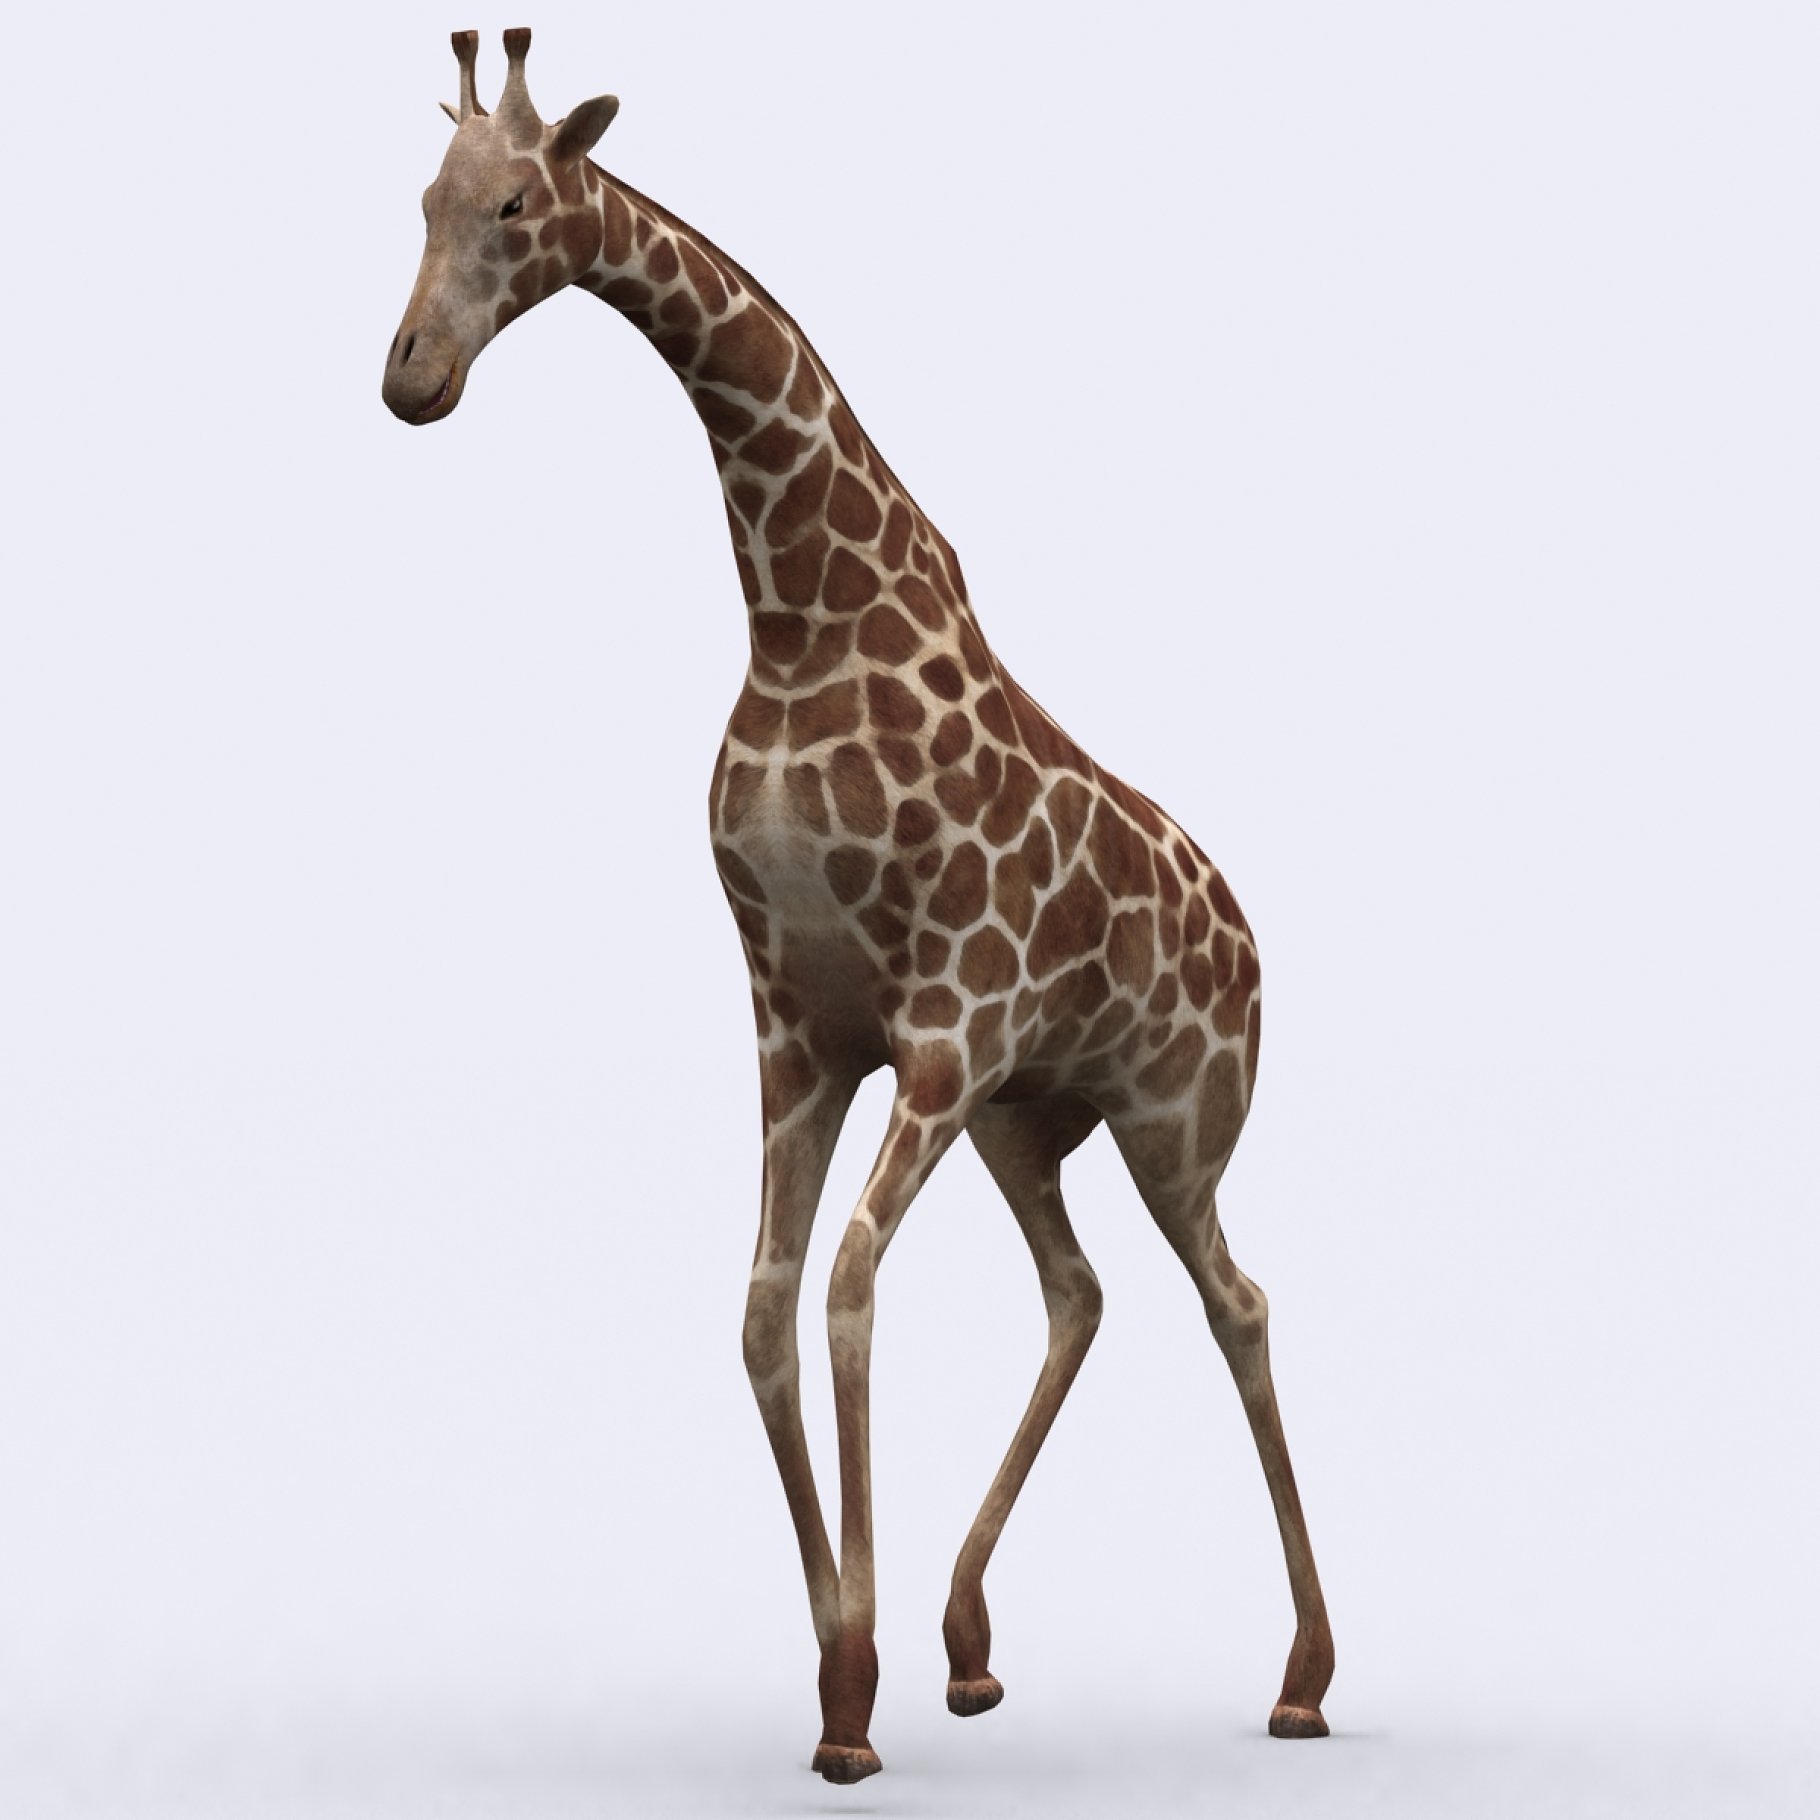 Illustration of lowpoly giraffe on a gray background.